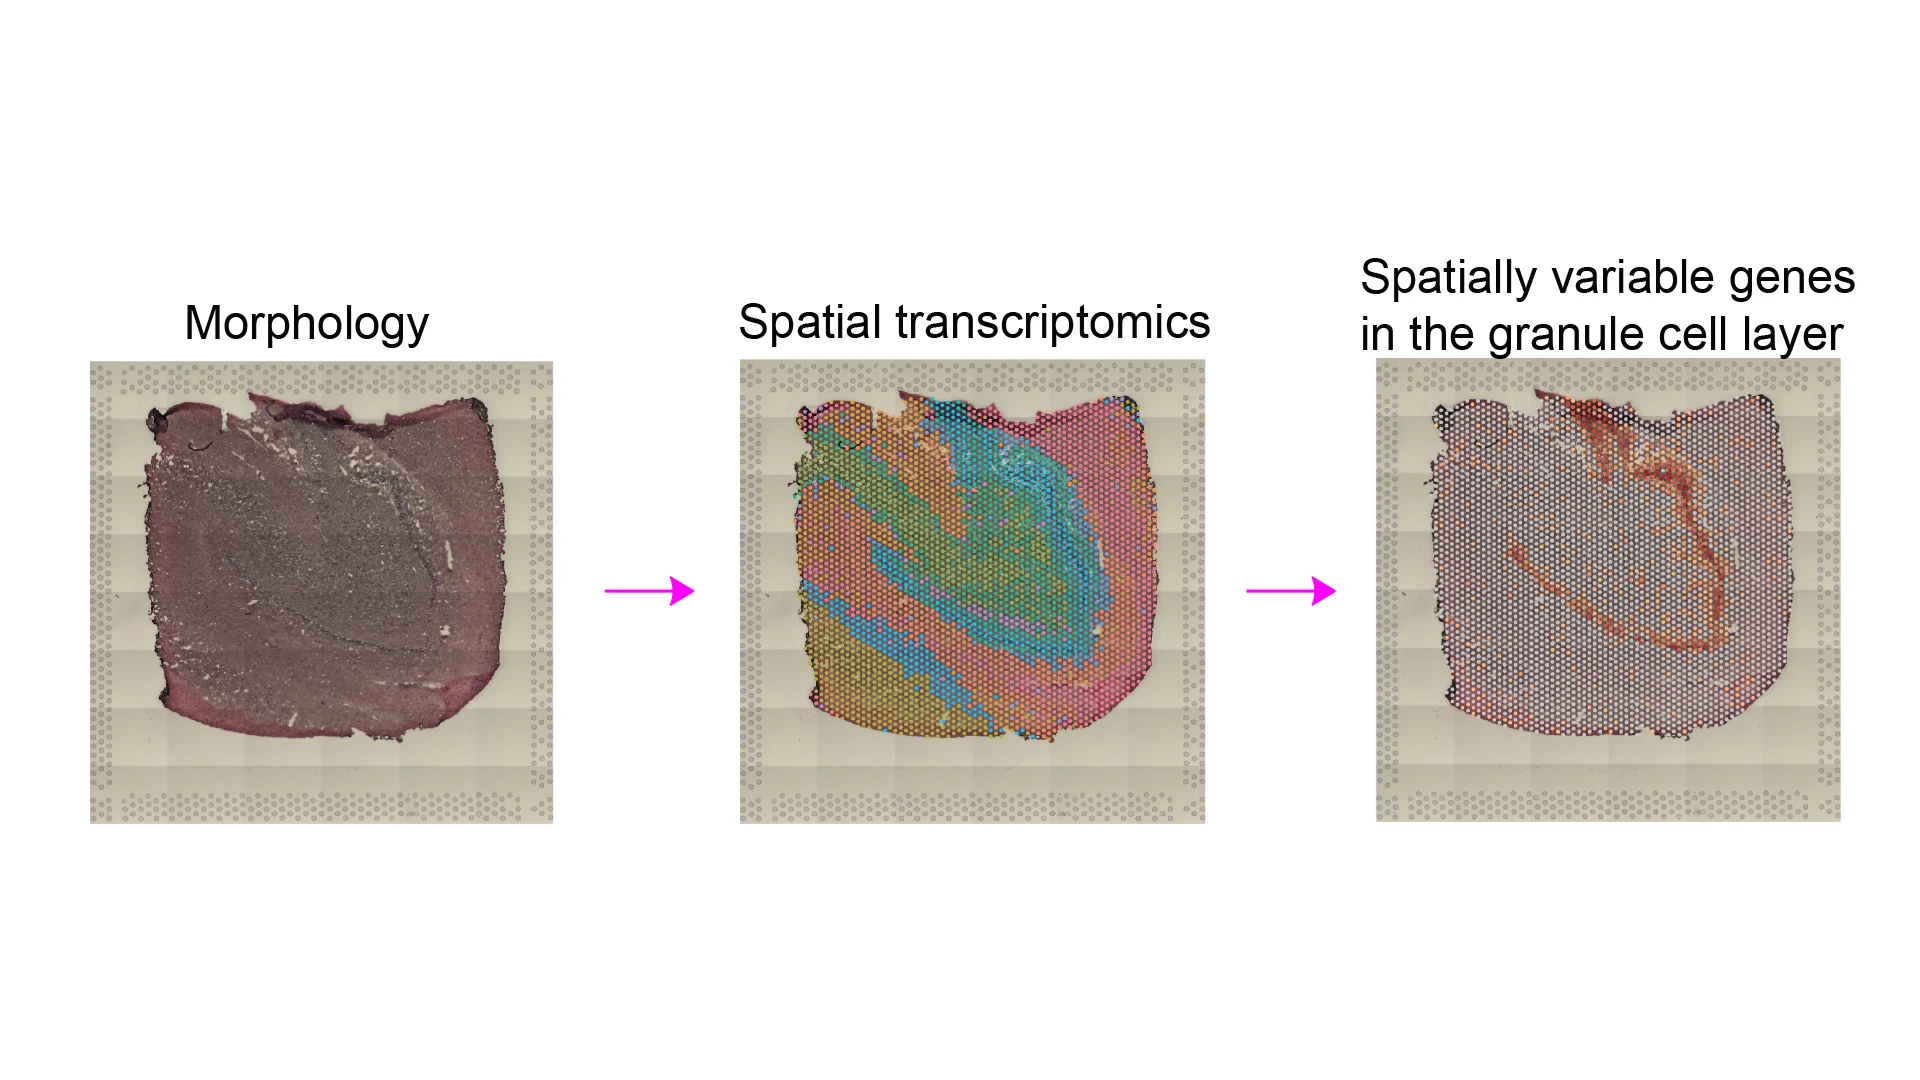 Figure 2. Morphology (H&E staining), spatial transcriptomics using 10x Genomics Visium platform, and spatially variable genes detected in the granule cell layer of the human dentate gyrus.